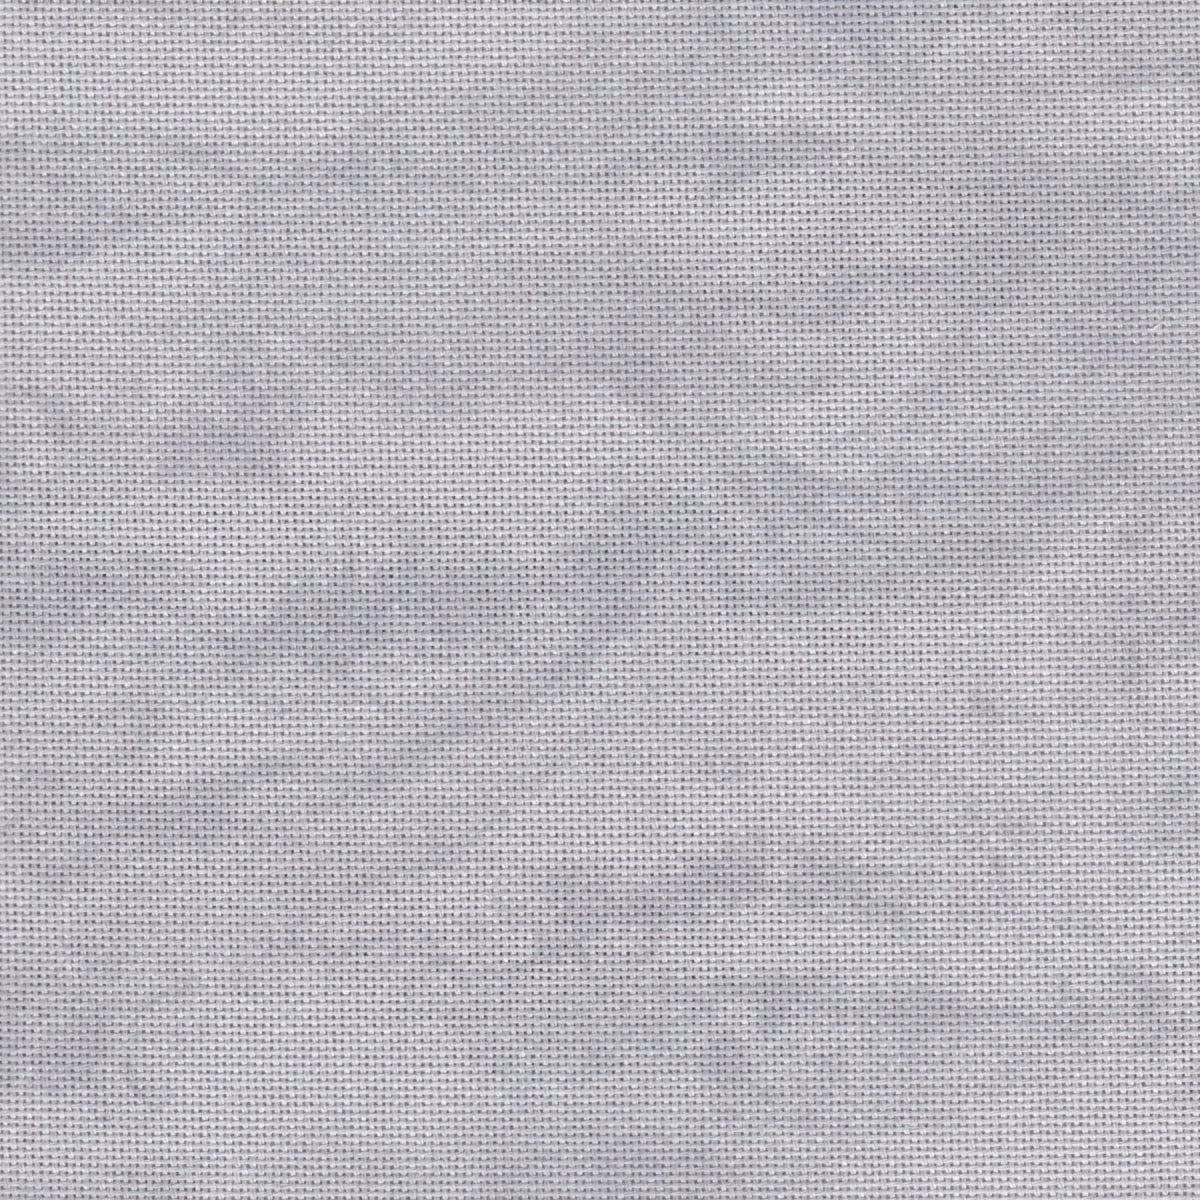 Lugana fabric 25 ct. Vintage Marbling - Zweigart for Cross Stitch (3835/7729)